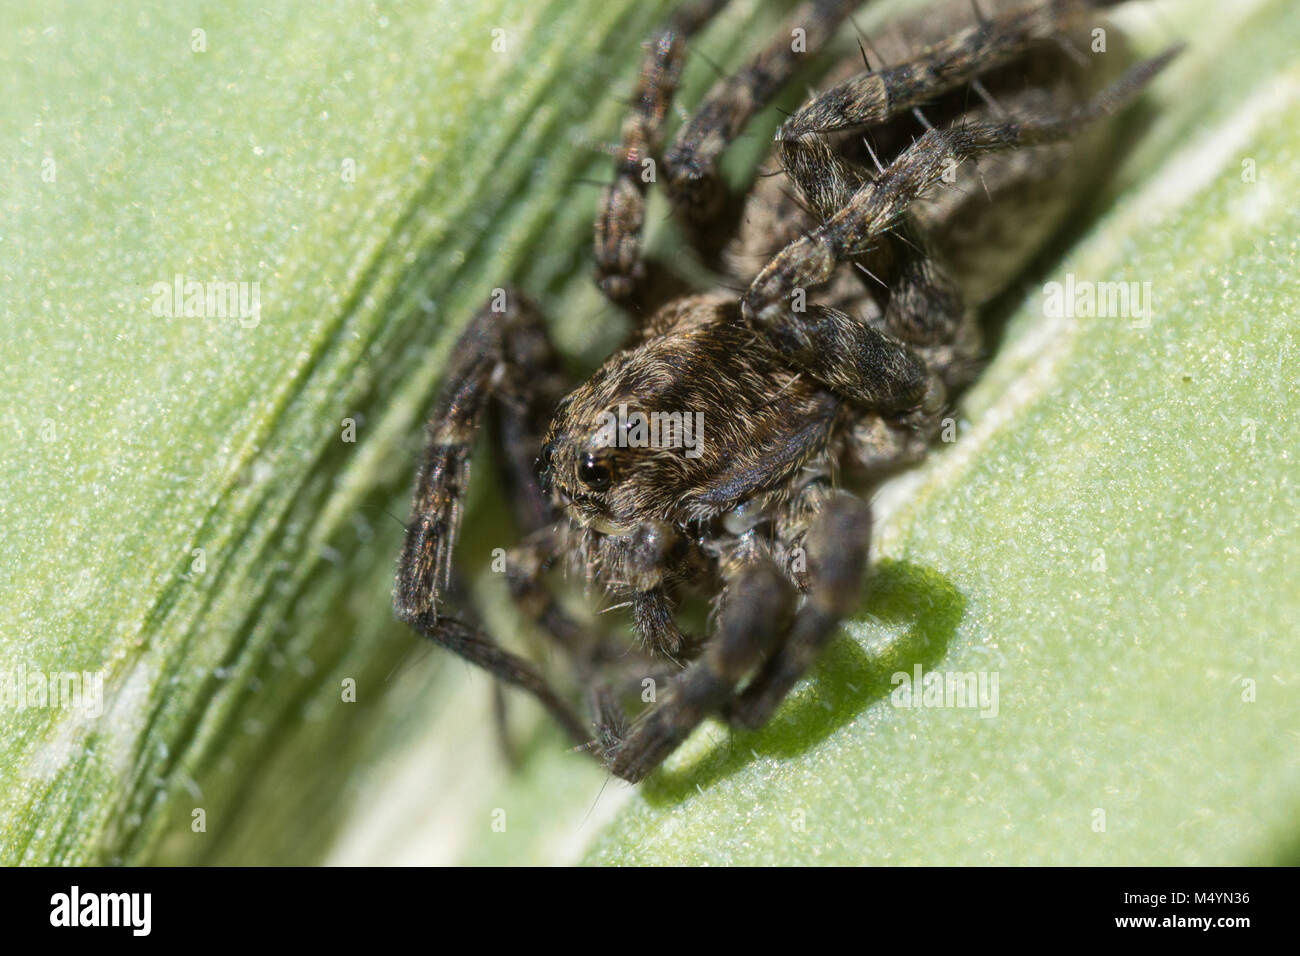 animal, arachnid, dangerous, green, hairy, insect, jumper, jumping, leaf, macro, nature, poison, scary, small, spider, weave, web, wild, wildlife Stock Photo